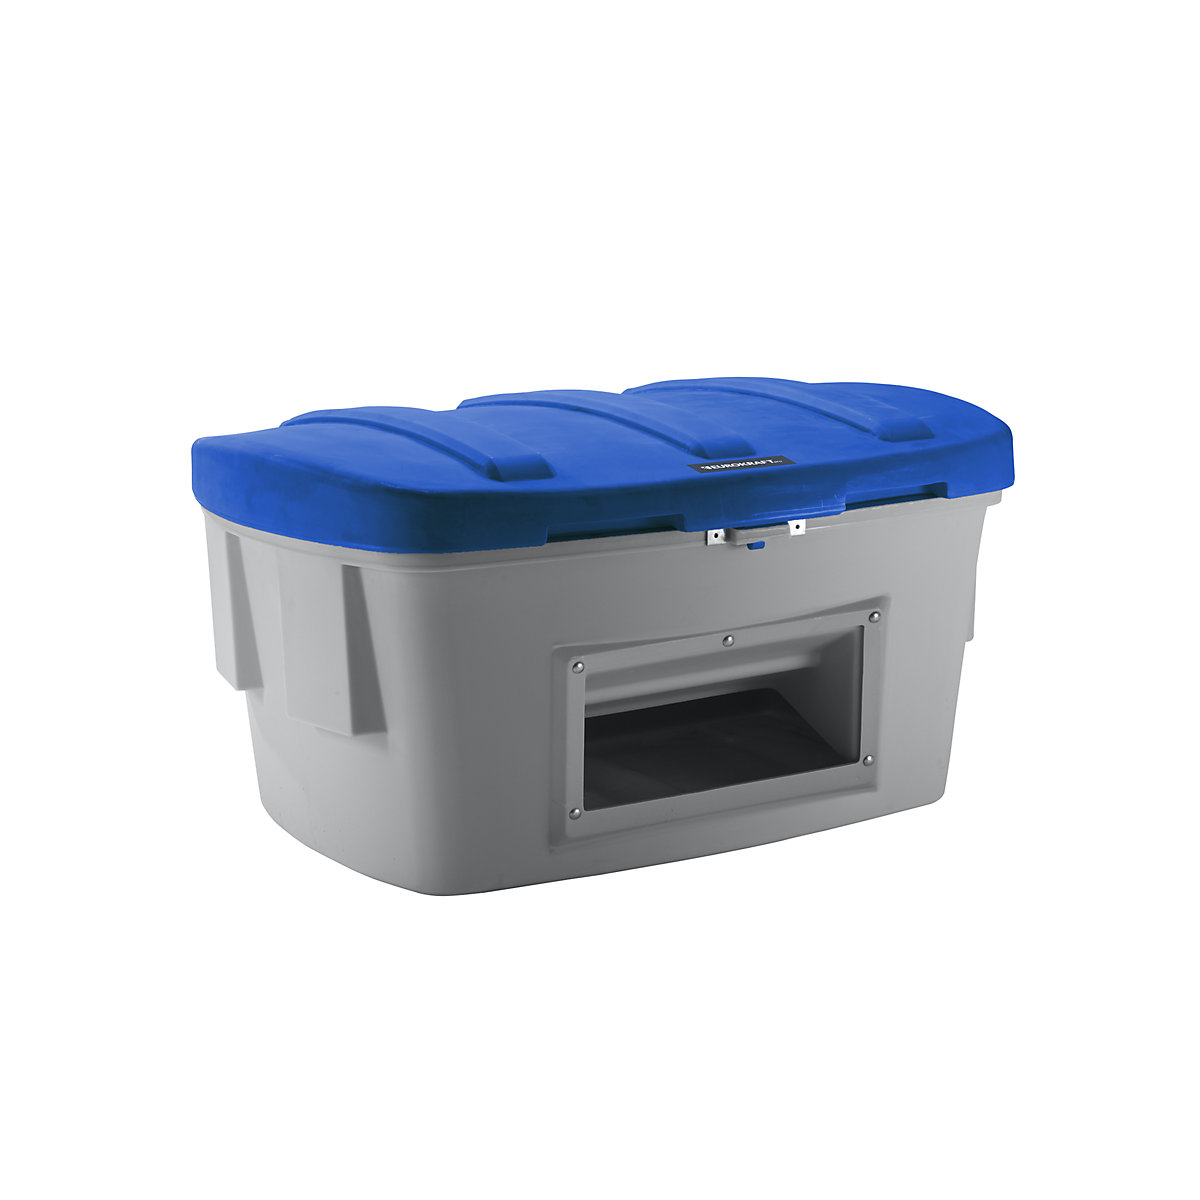 Universal / grit container – eurokraft pro, with dispenser opening, 1000 l, blue lid-6